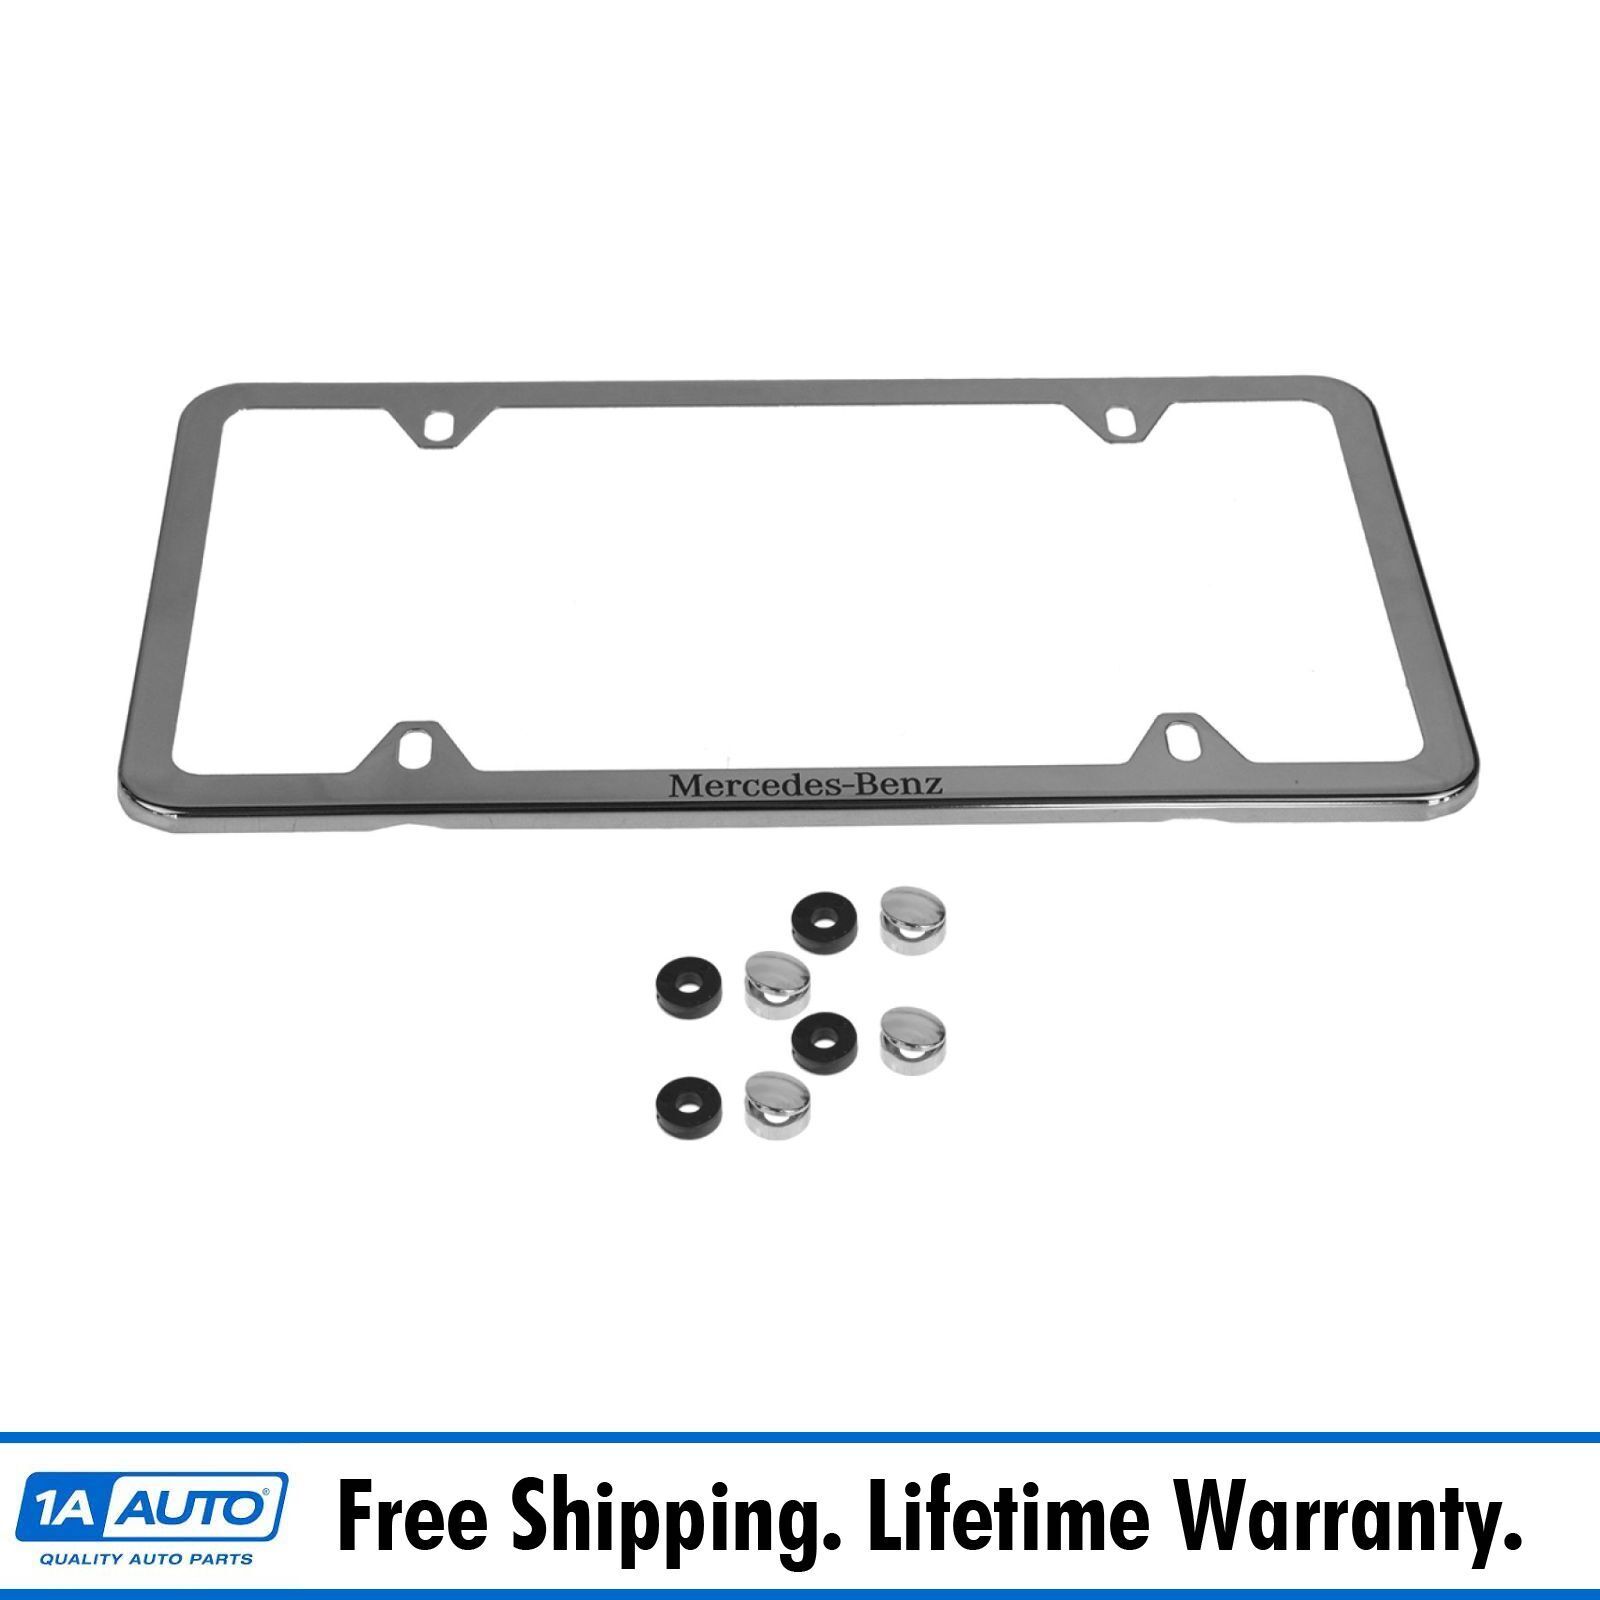 OEM Q6880124 License Plate Frame Polished Stainless Steel for Mercedes Benz